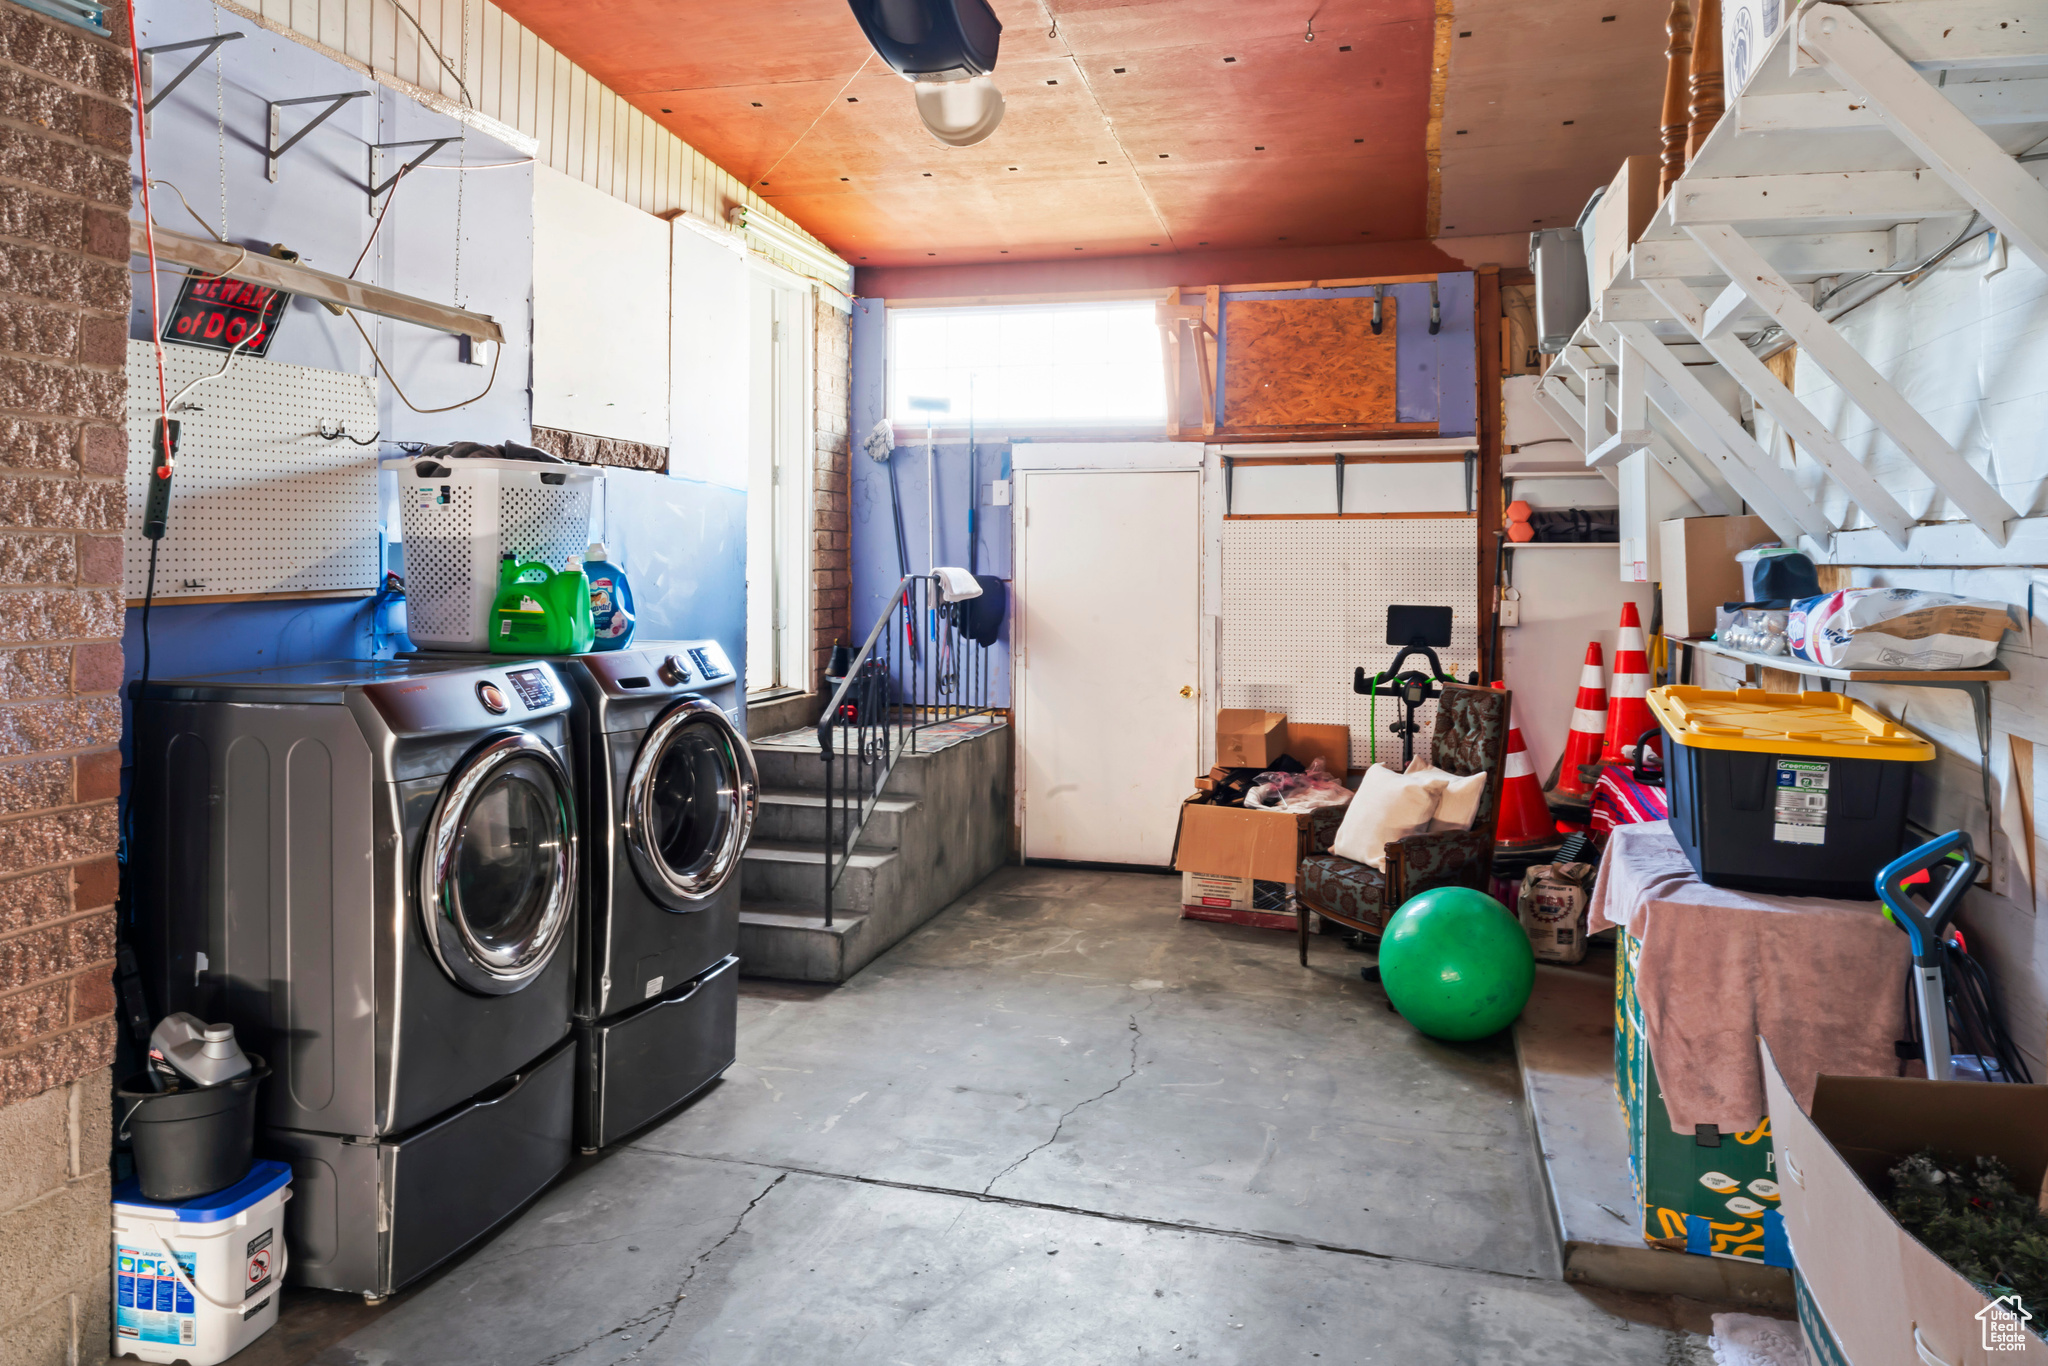 Interior space with wood ceiling and washer and clothes dryer